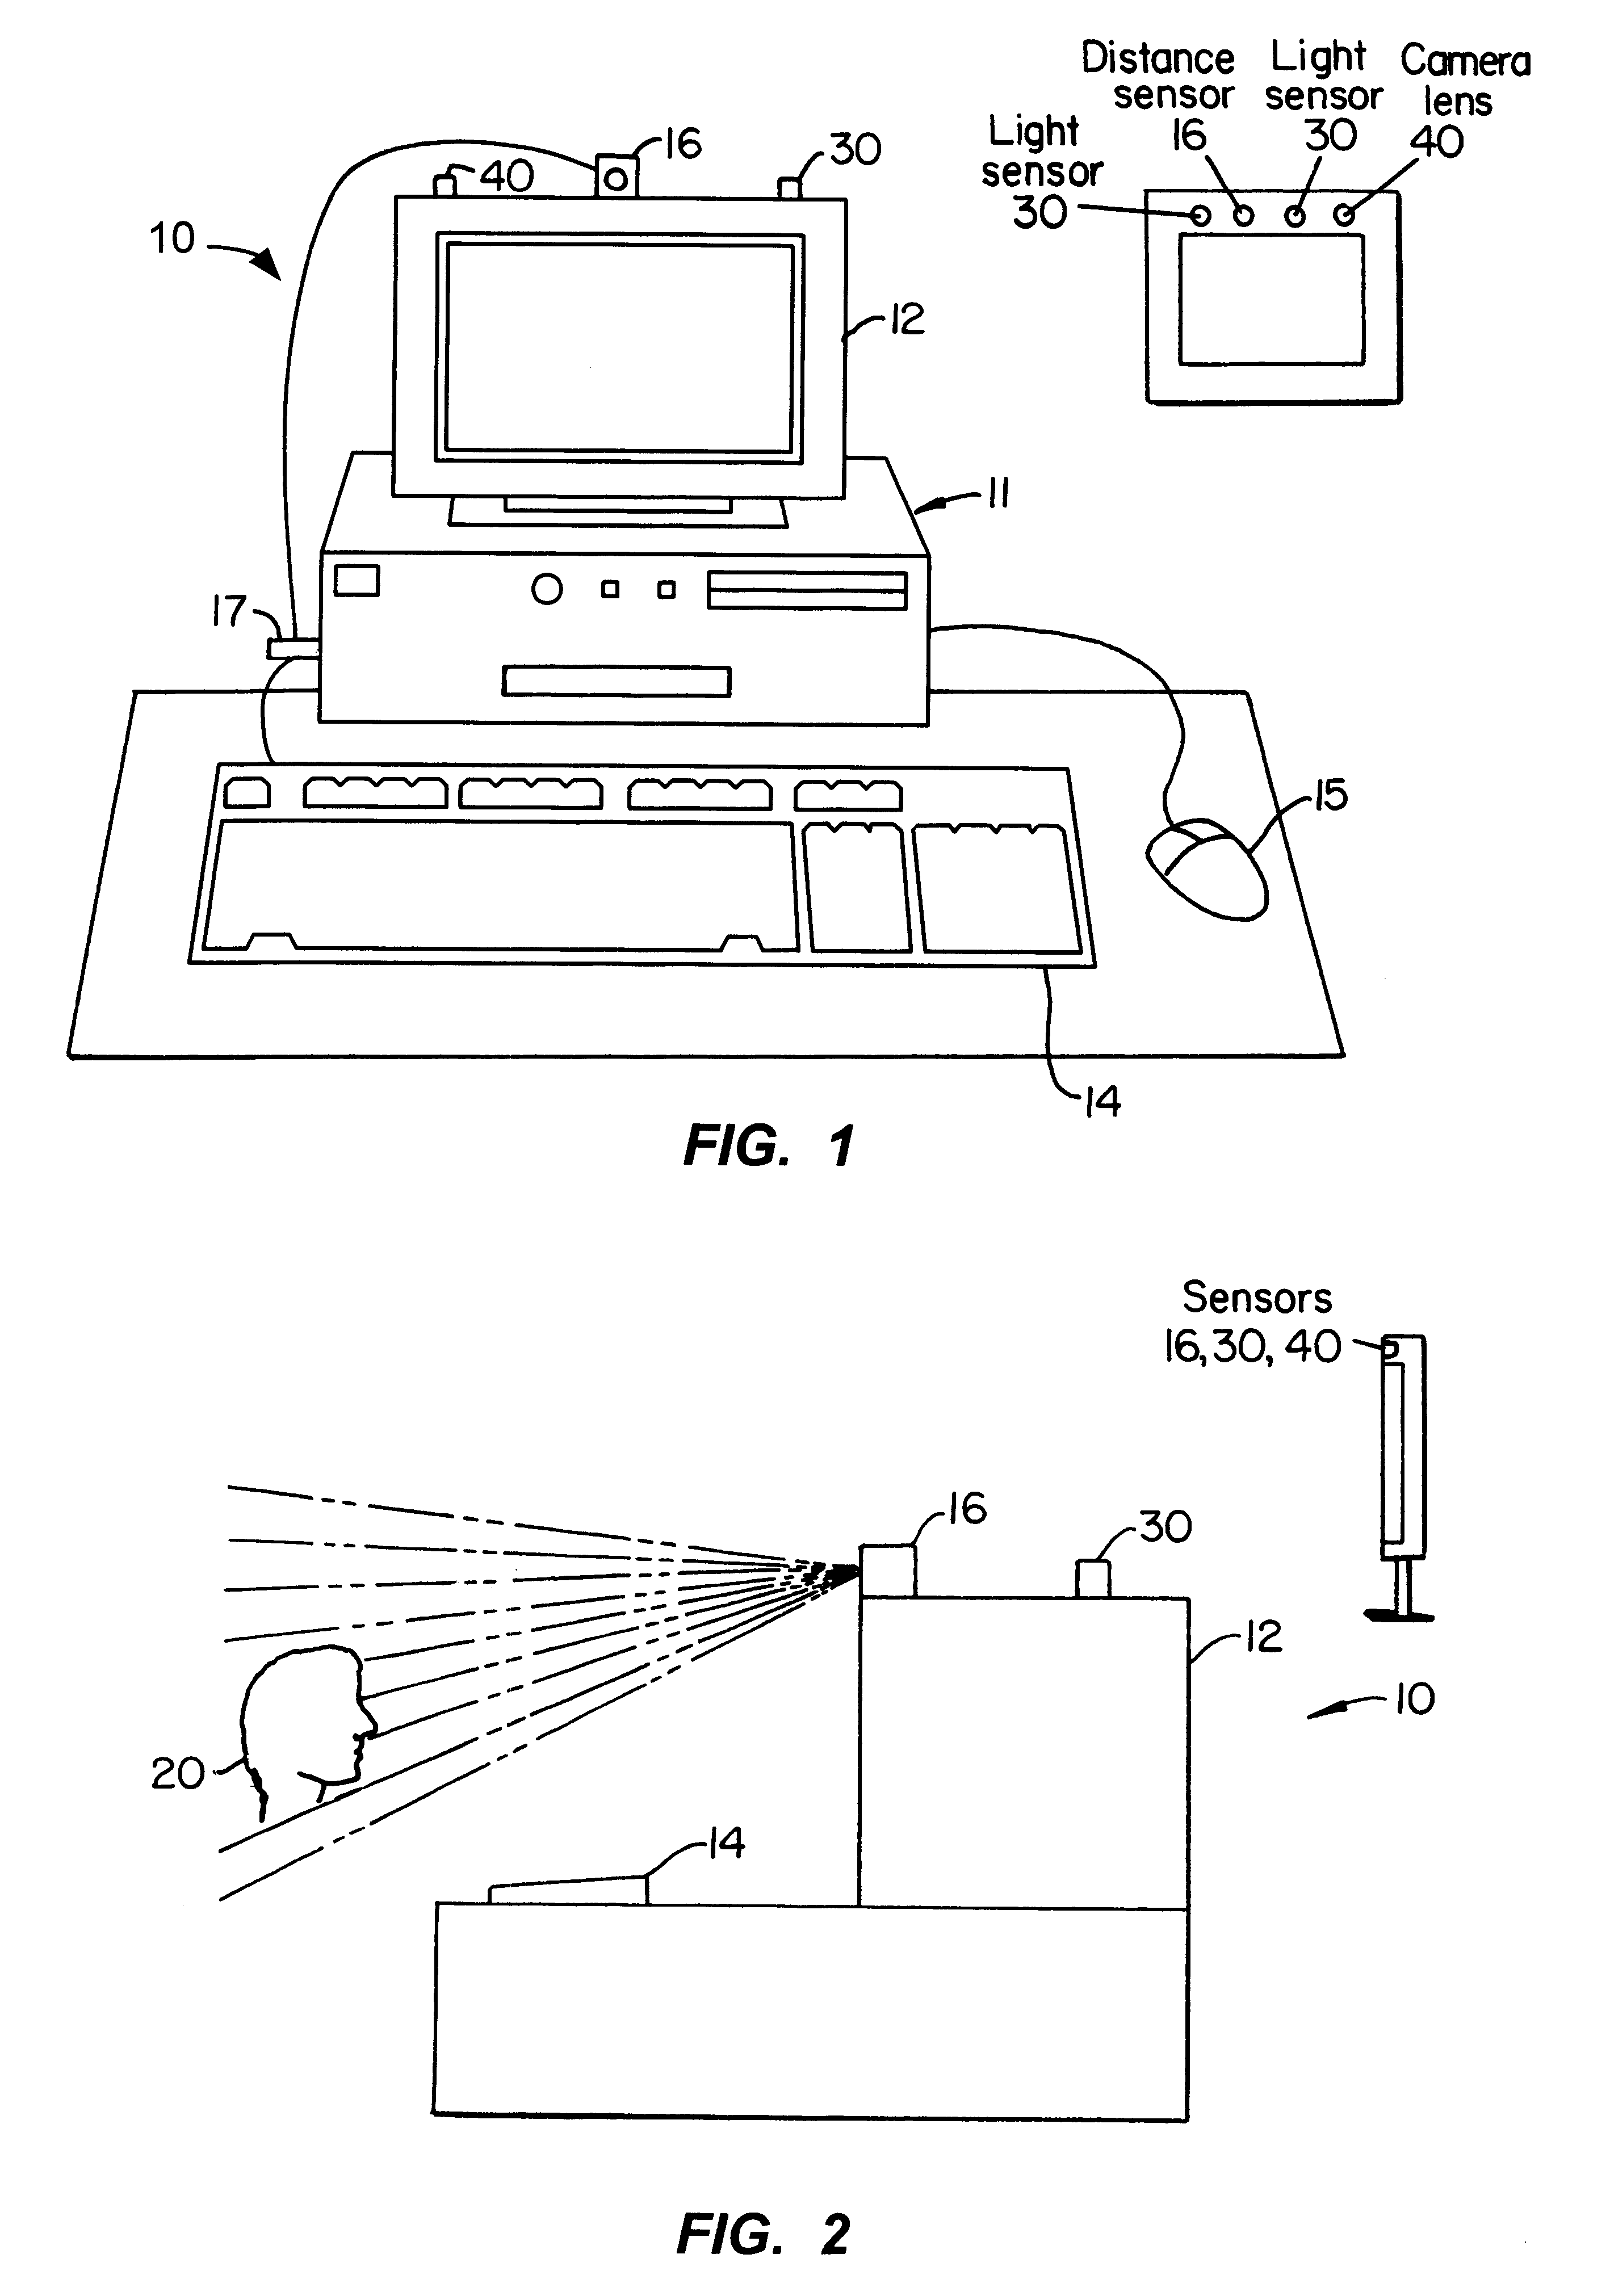 System and method for optimal viewing of computer monitors to minimize eyestrain